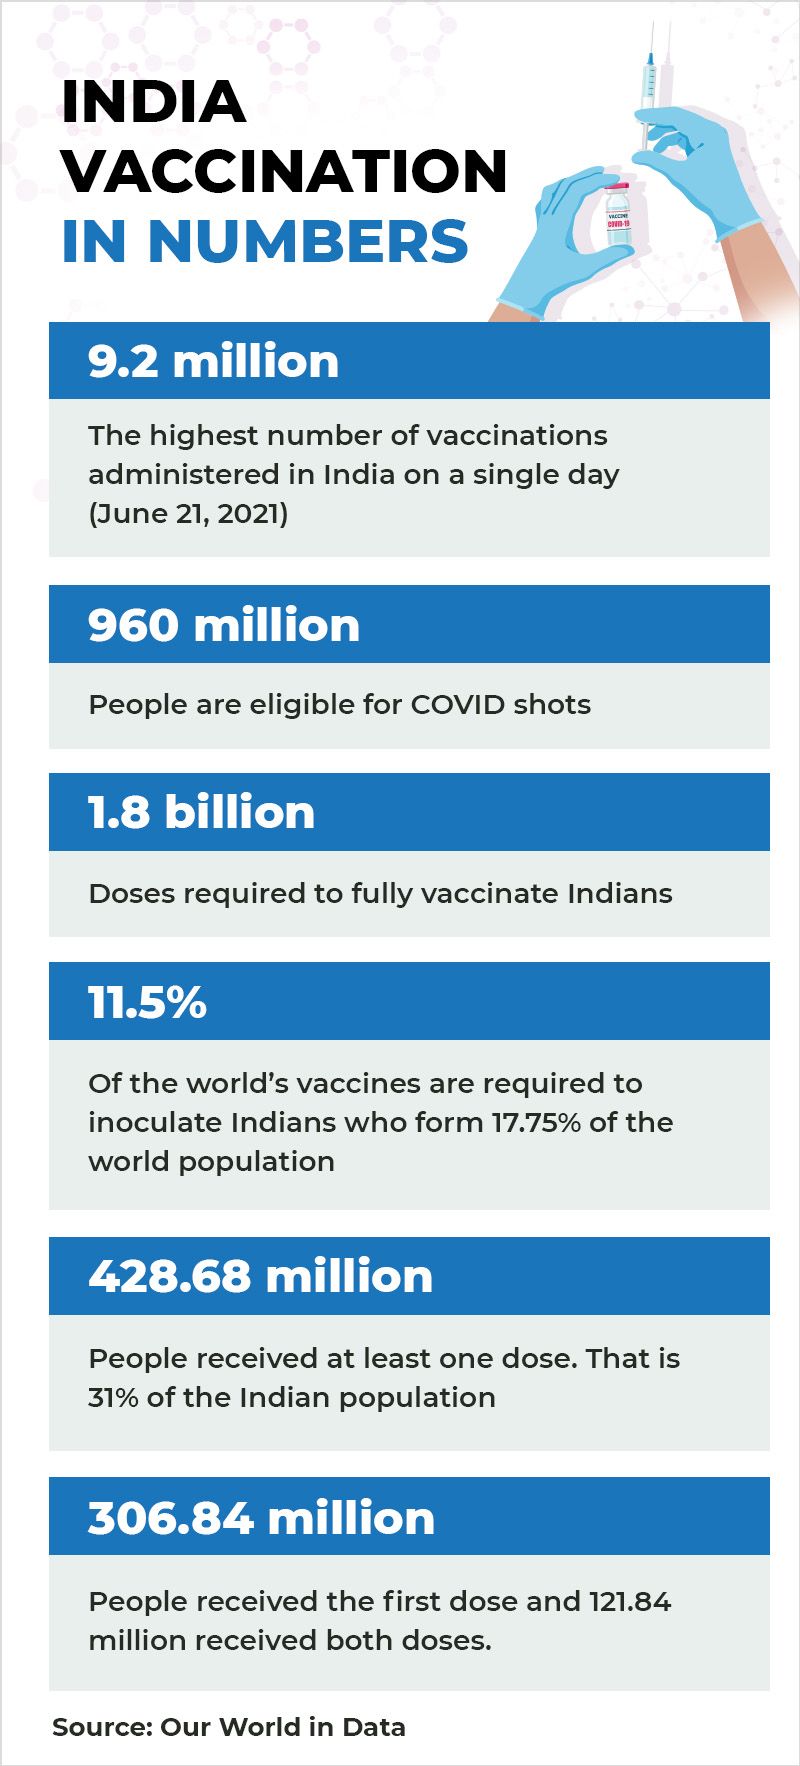 INDIA VACCINATION NUMBERS